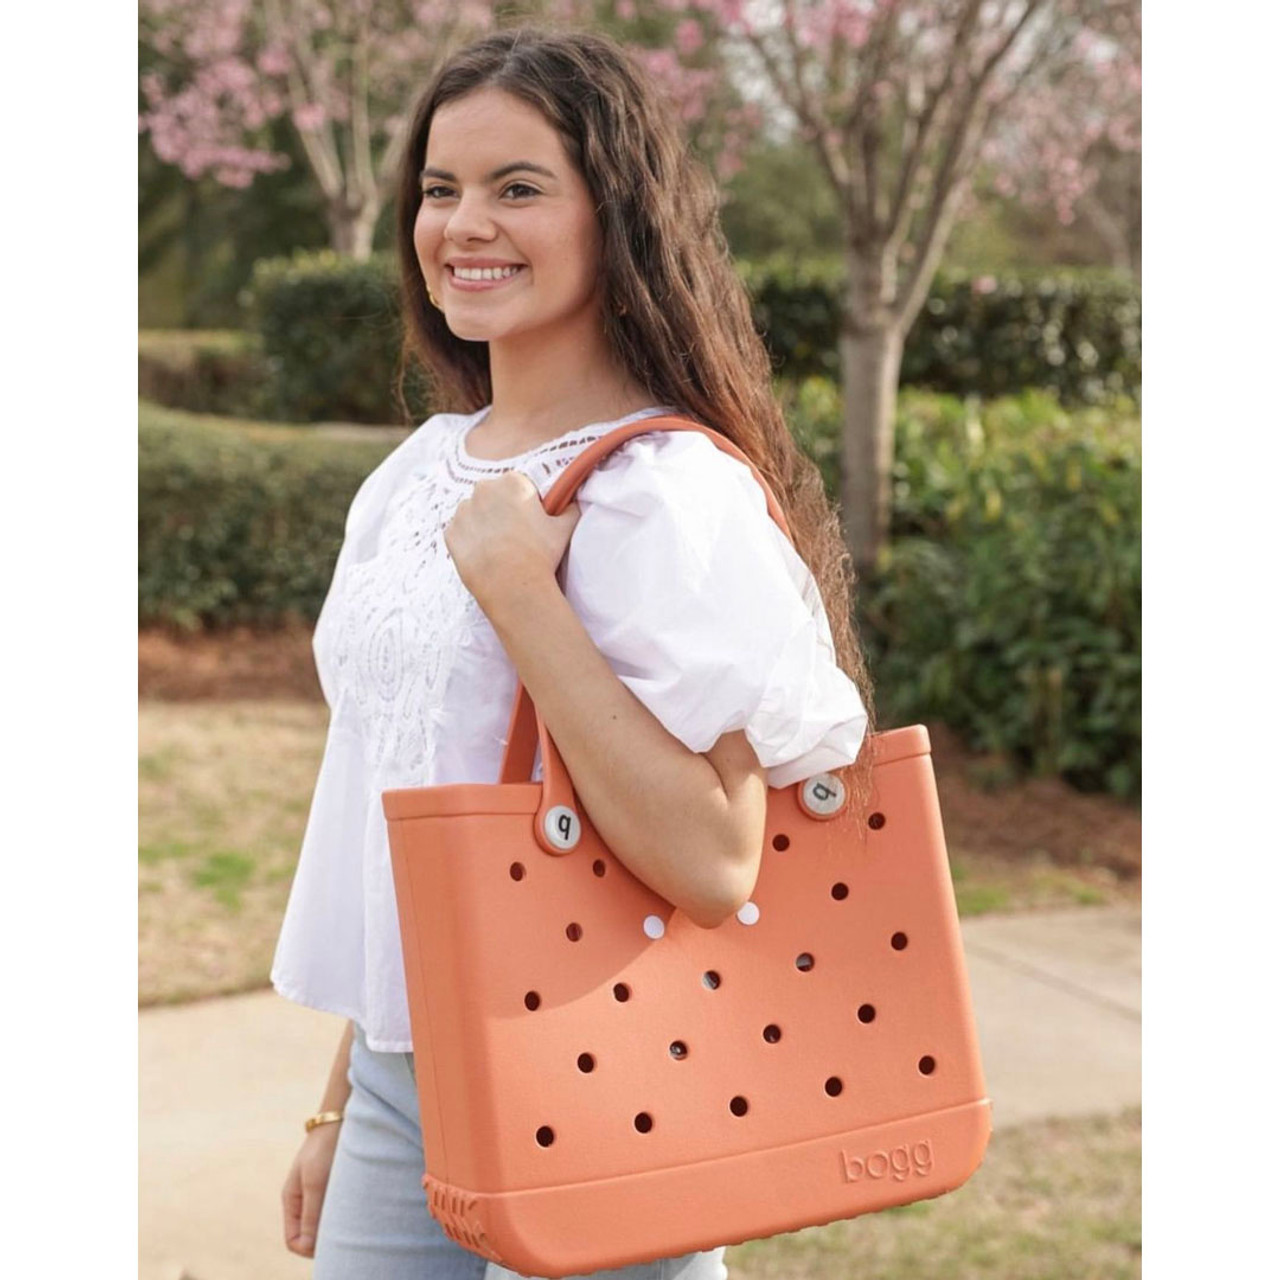 Bitty Bogg Bag- Multiple Colors